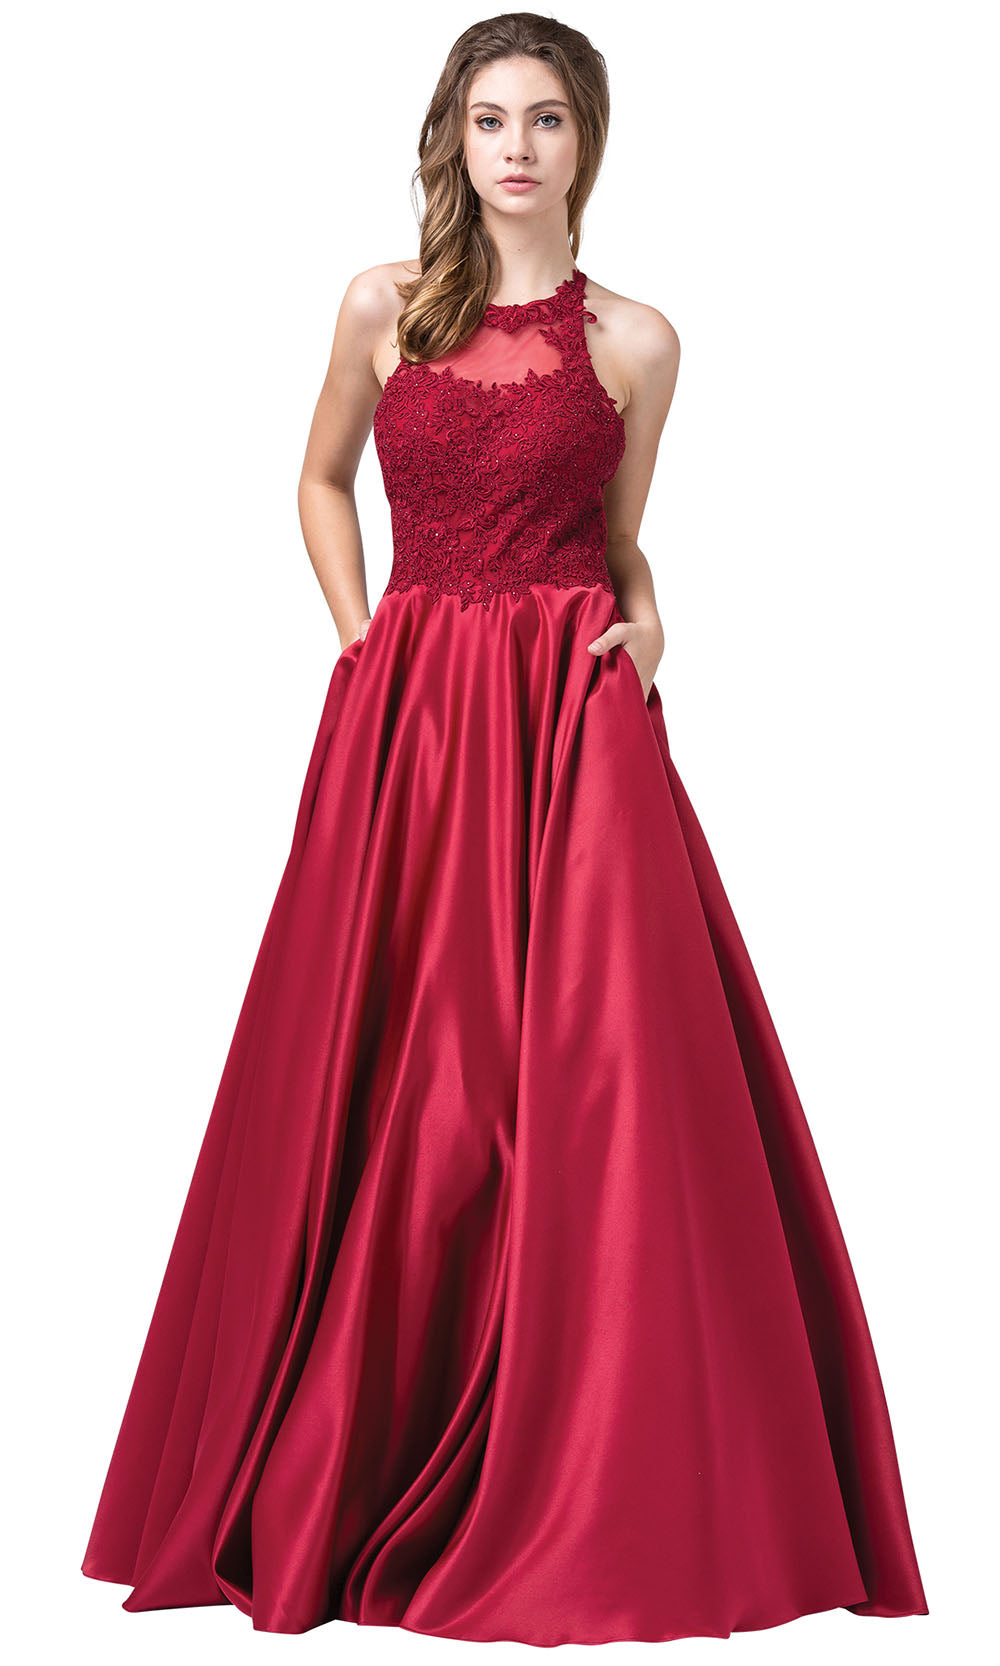 Dancing Queen - 2625 Embroidered Halter Neck A-Line Dress In Red